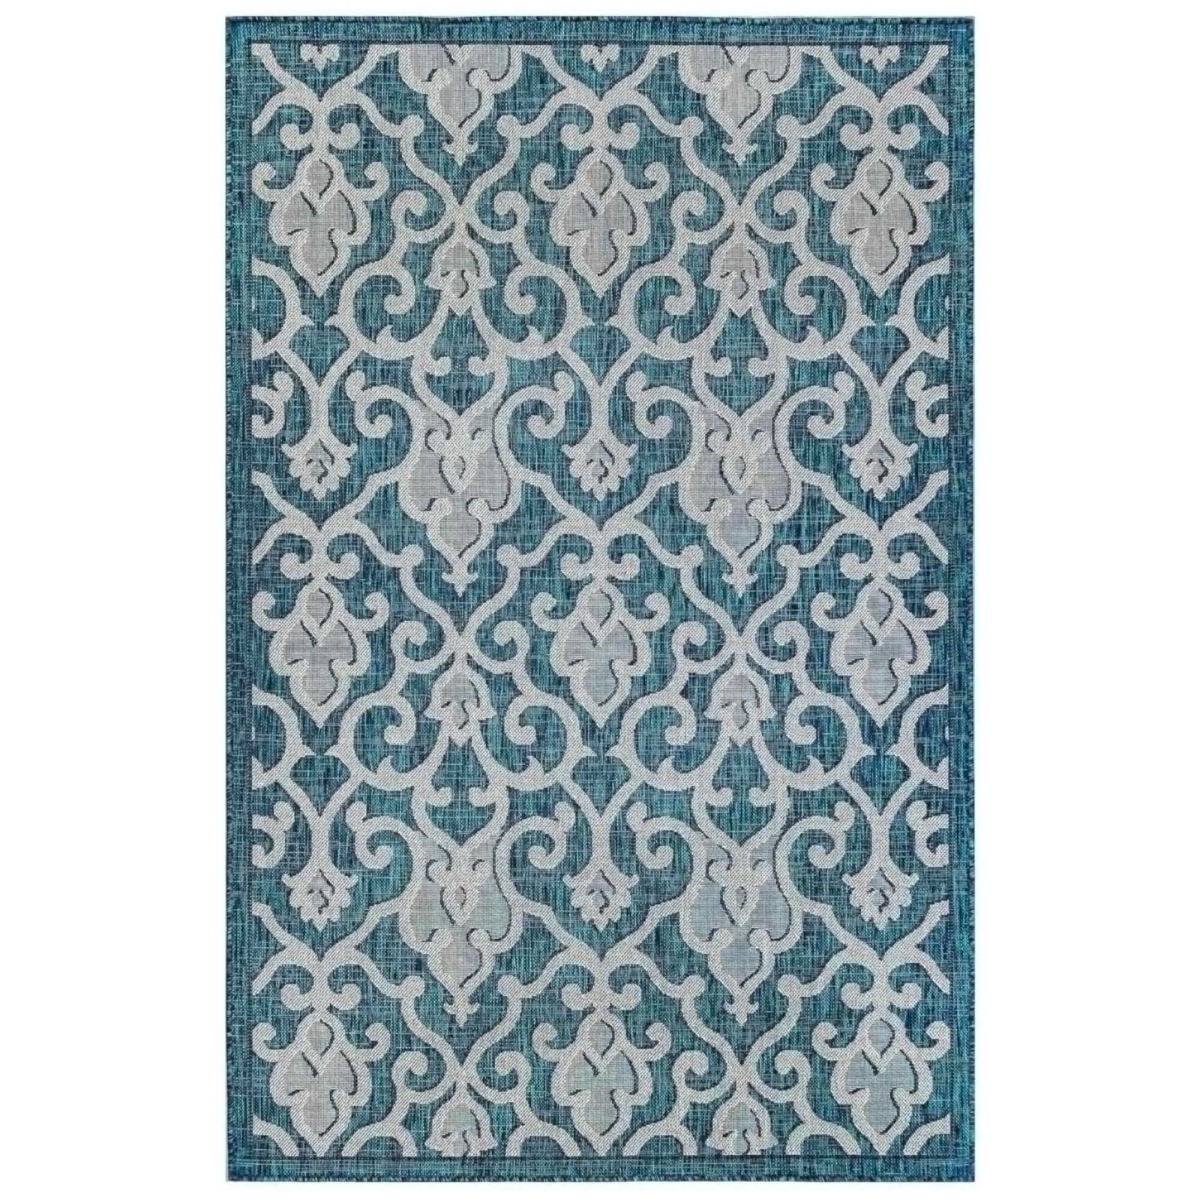 Trans-ocean Imports Cre58843394 4 Ft. 10 In. X 7 Ft. 6 In. Liora Manne Carmel Baroque Indoor & Outdoor Wilton Woven Rectangle Rug - Teal